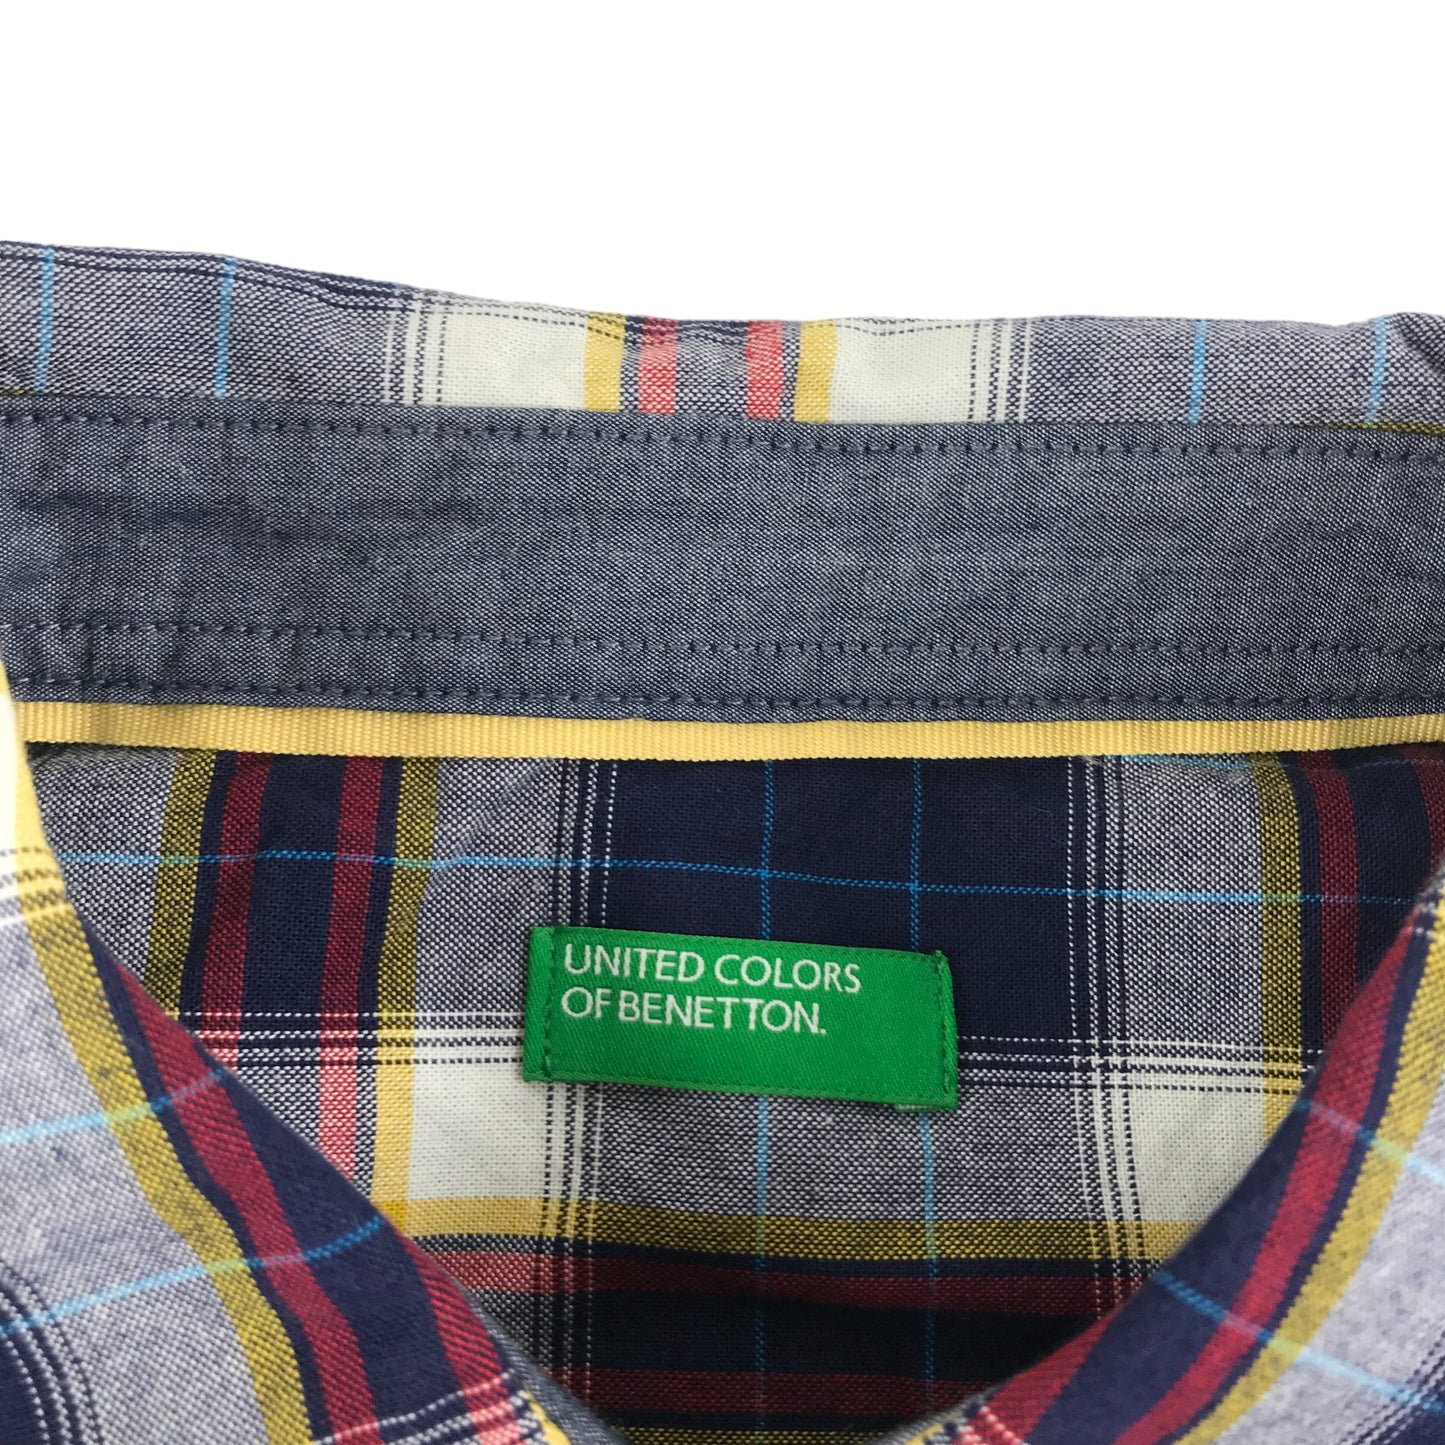 Benetton Shirt Size S Navy Burgundy Checked Long Sleeve Button Up